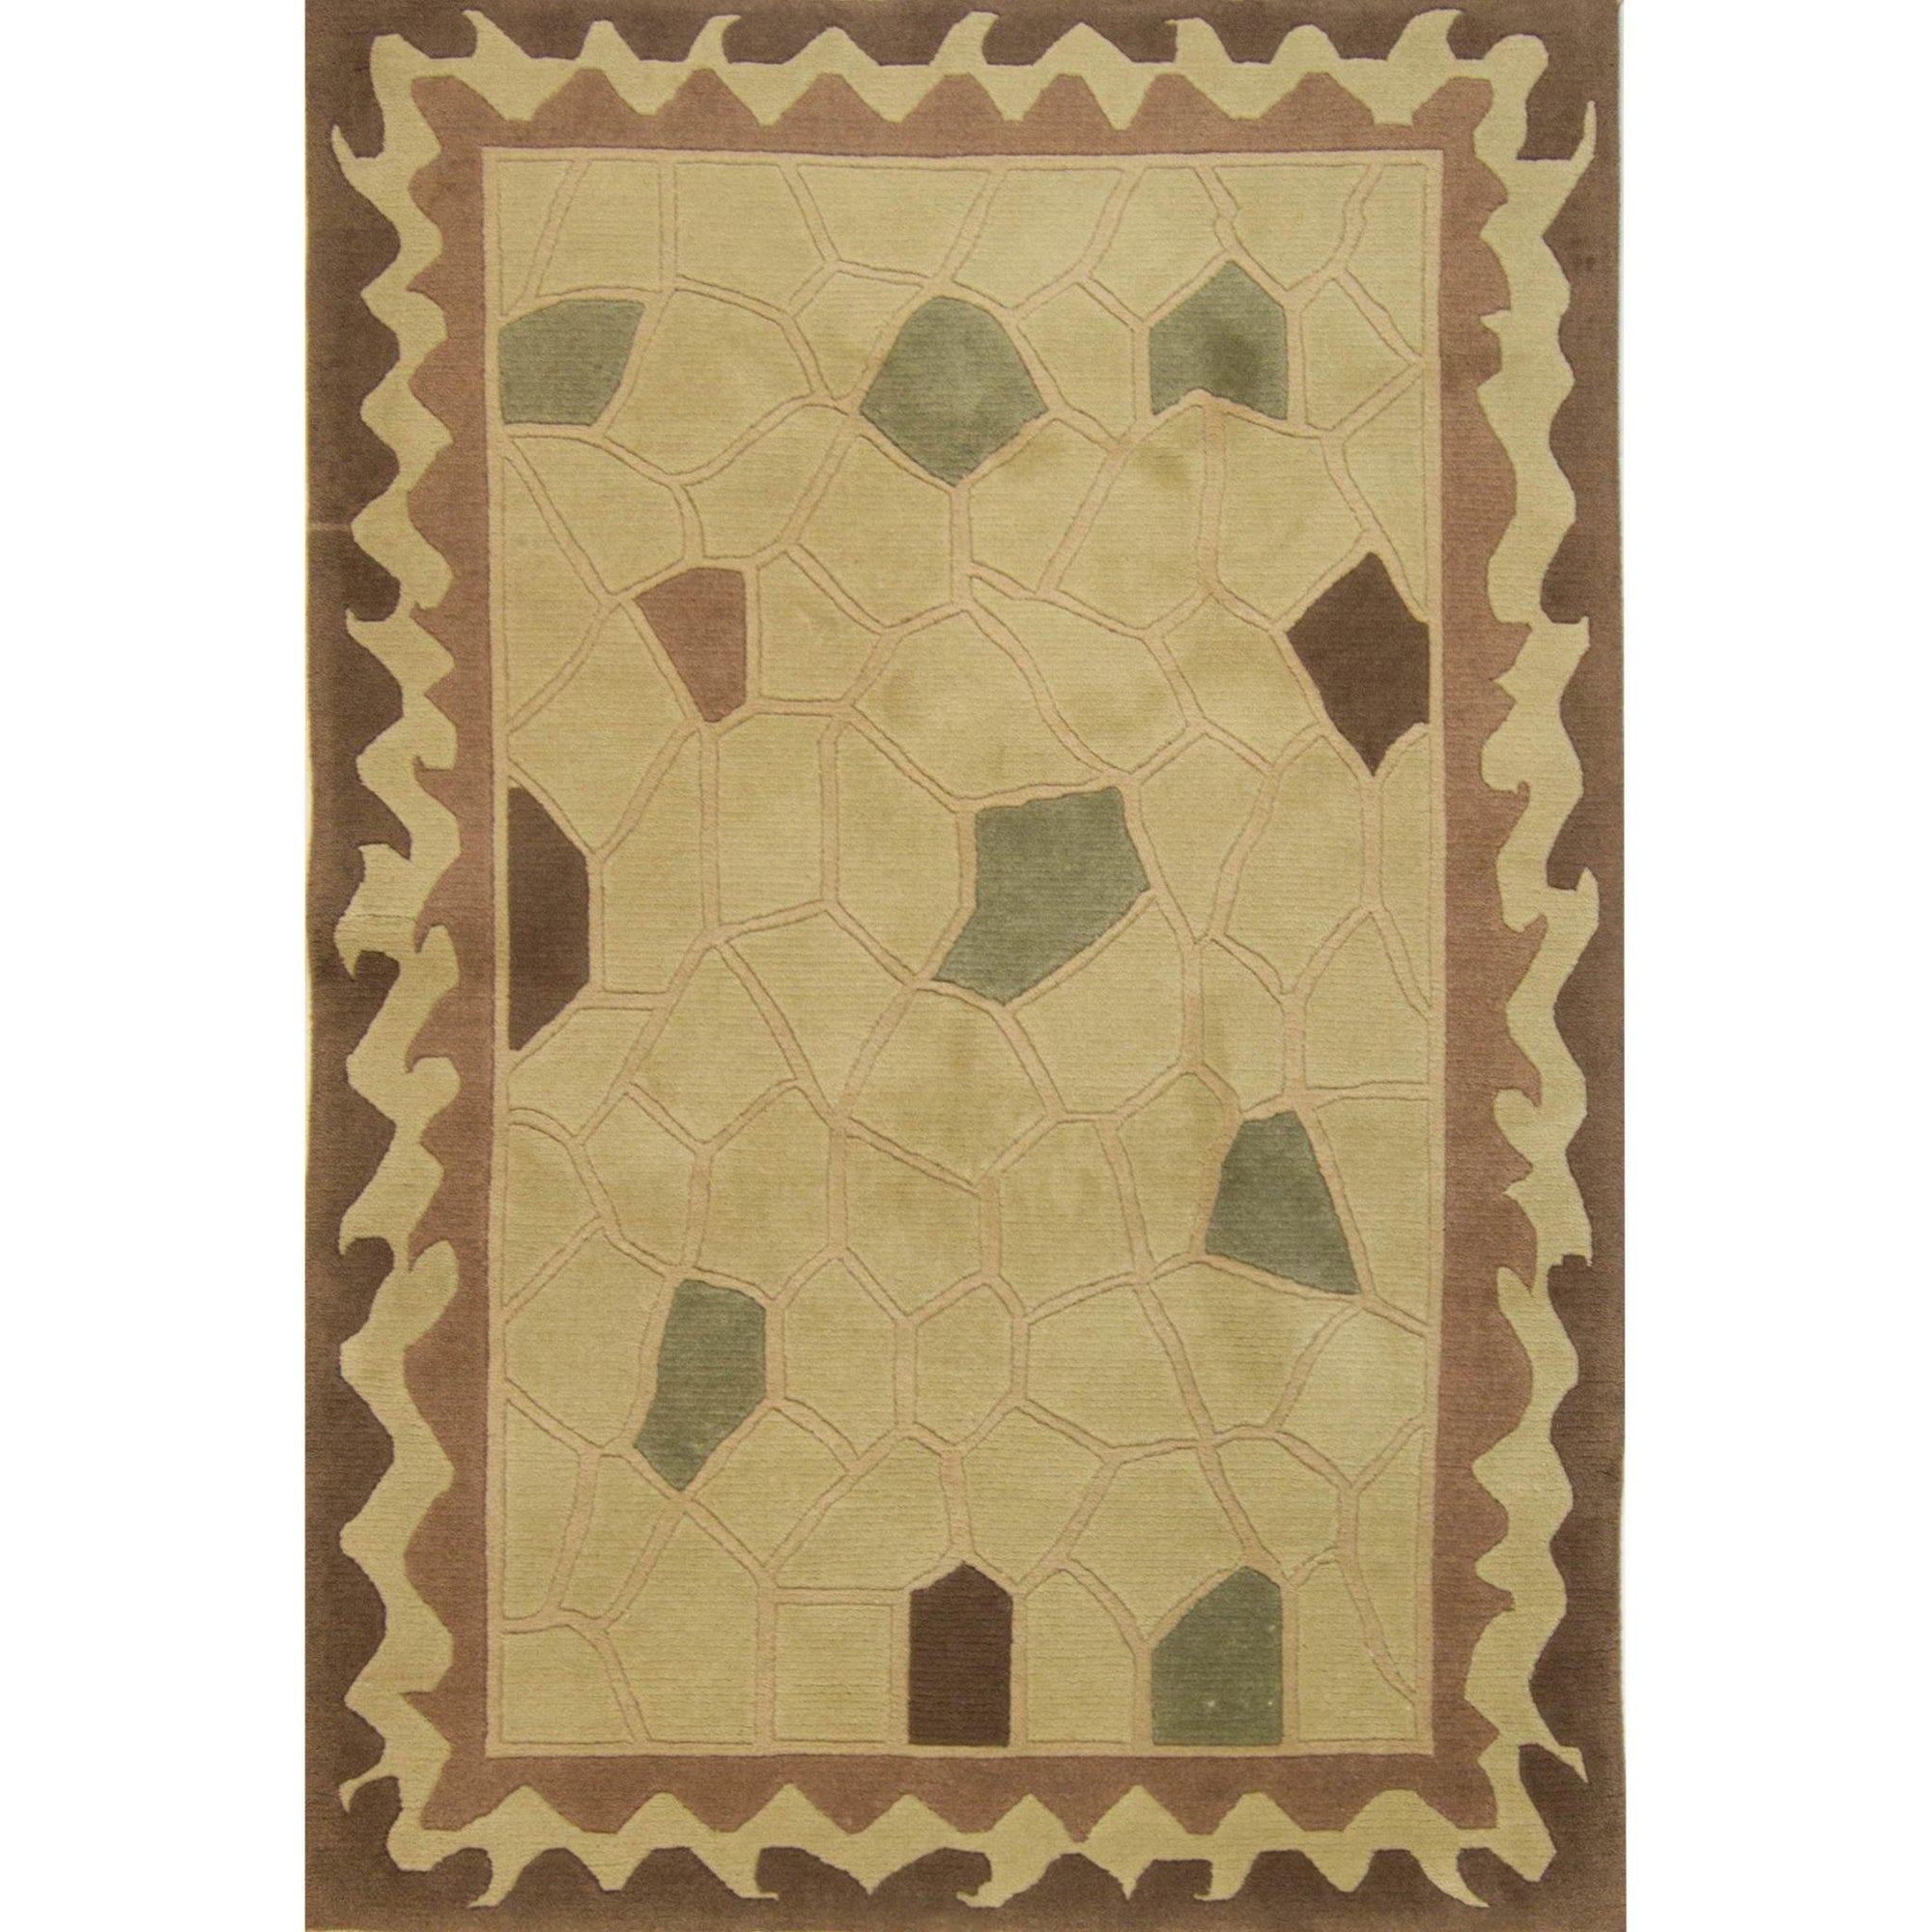 Hand-knotted Wool Modern Rug 120cm x 175cm